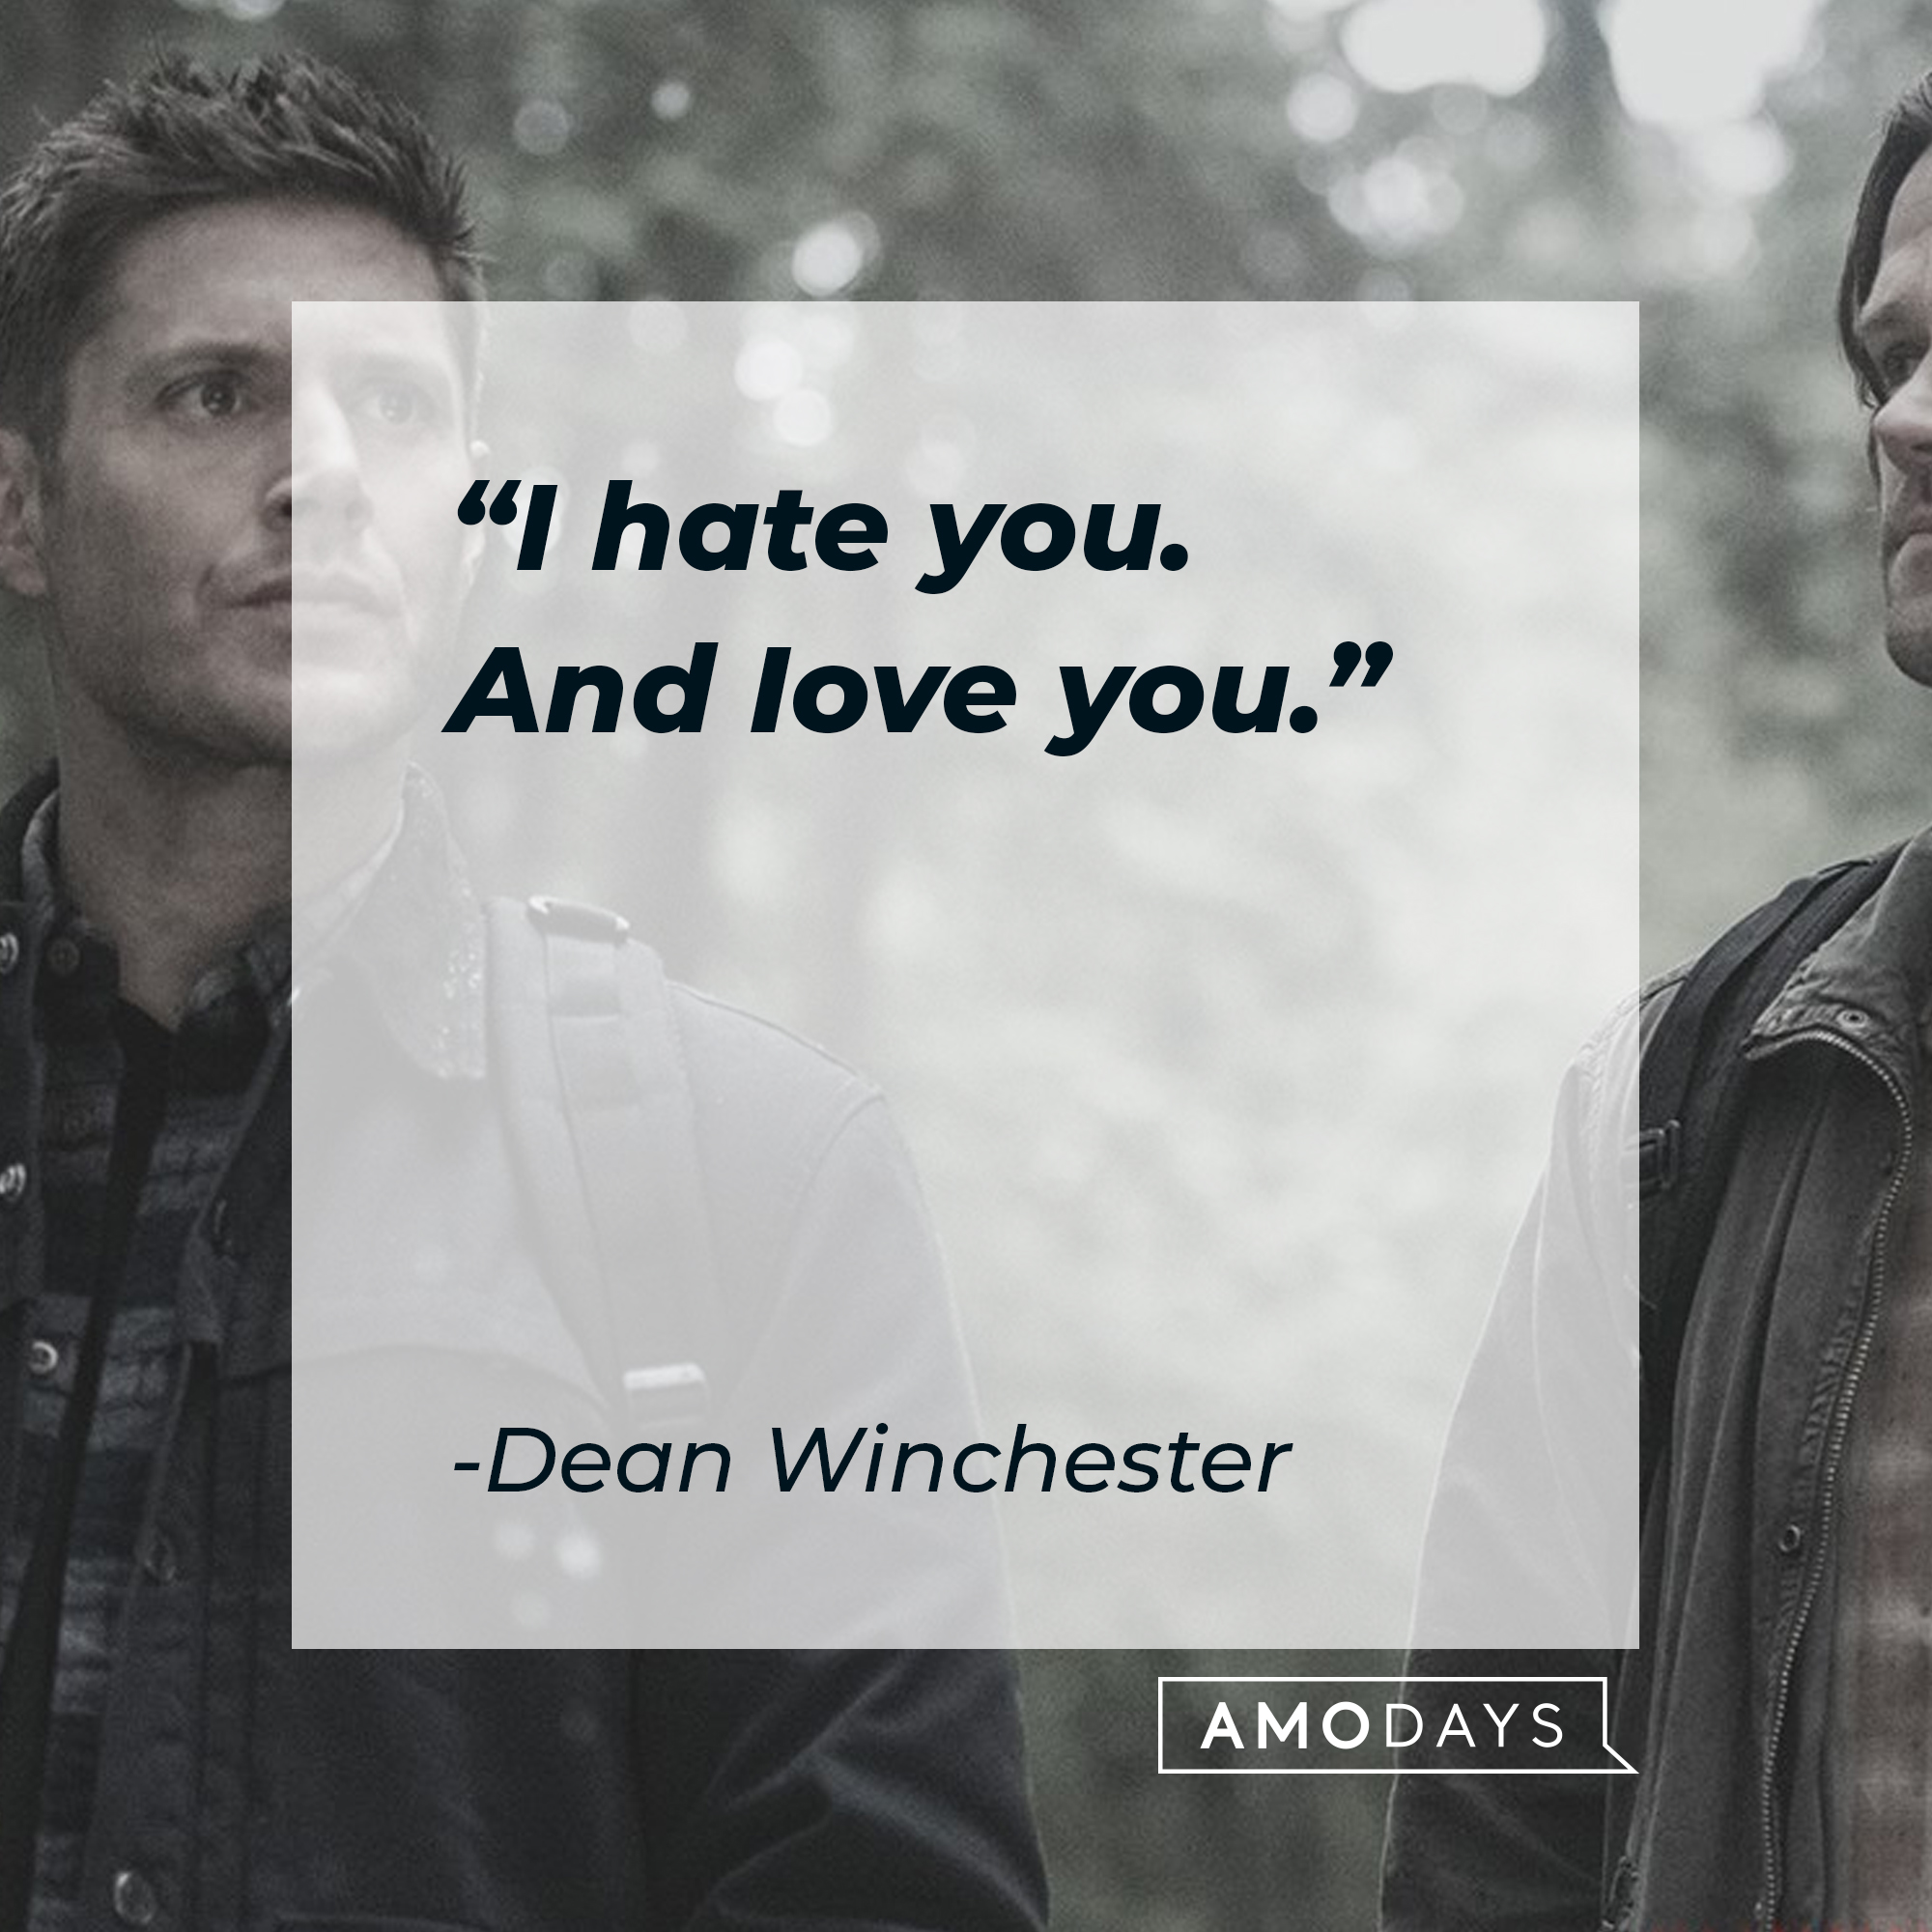 Sam and Dean Winchester, with Dean's quote: "I hate you. And I love you." | Source: Facebook.com/Supernatural